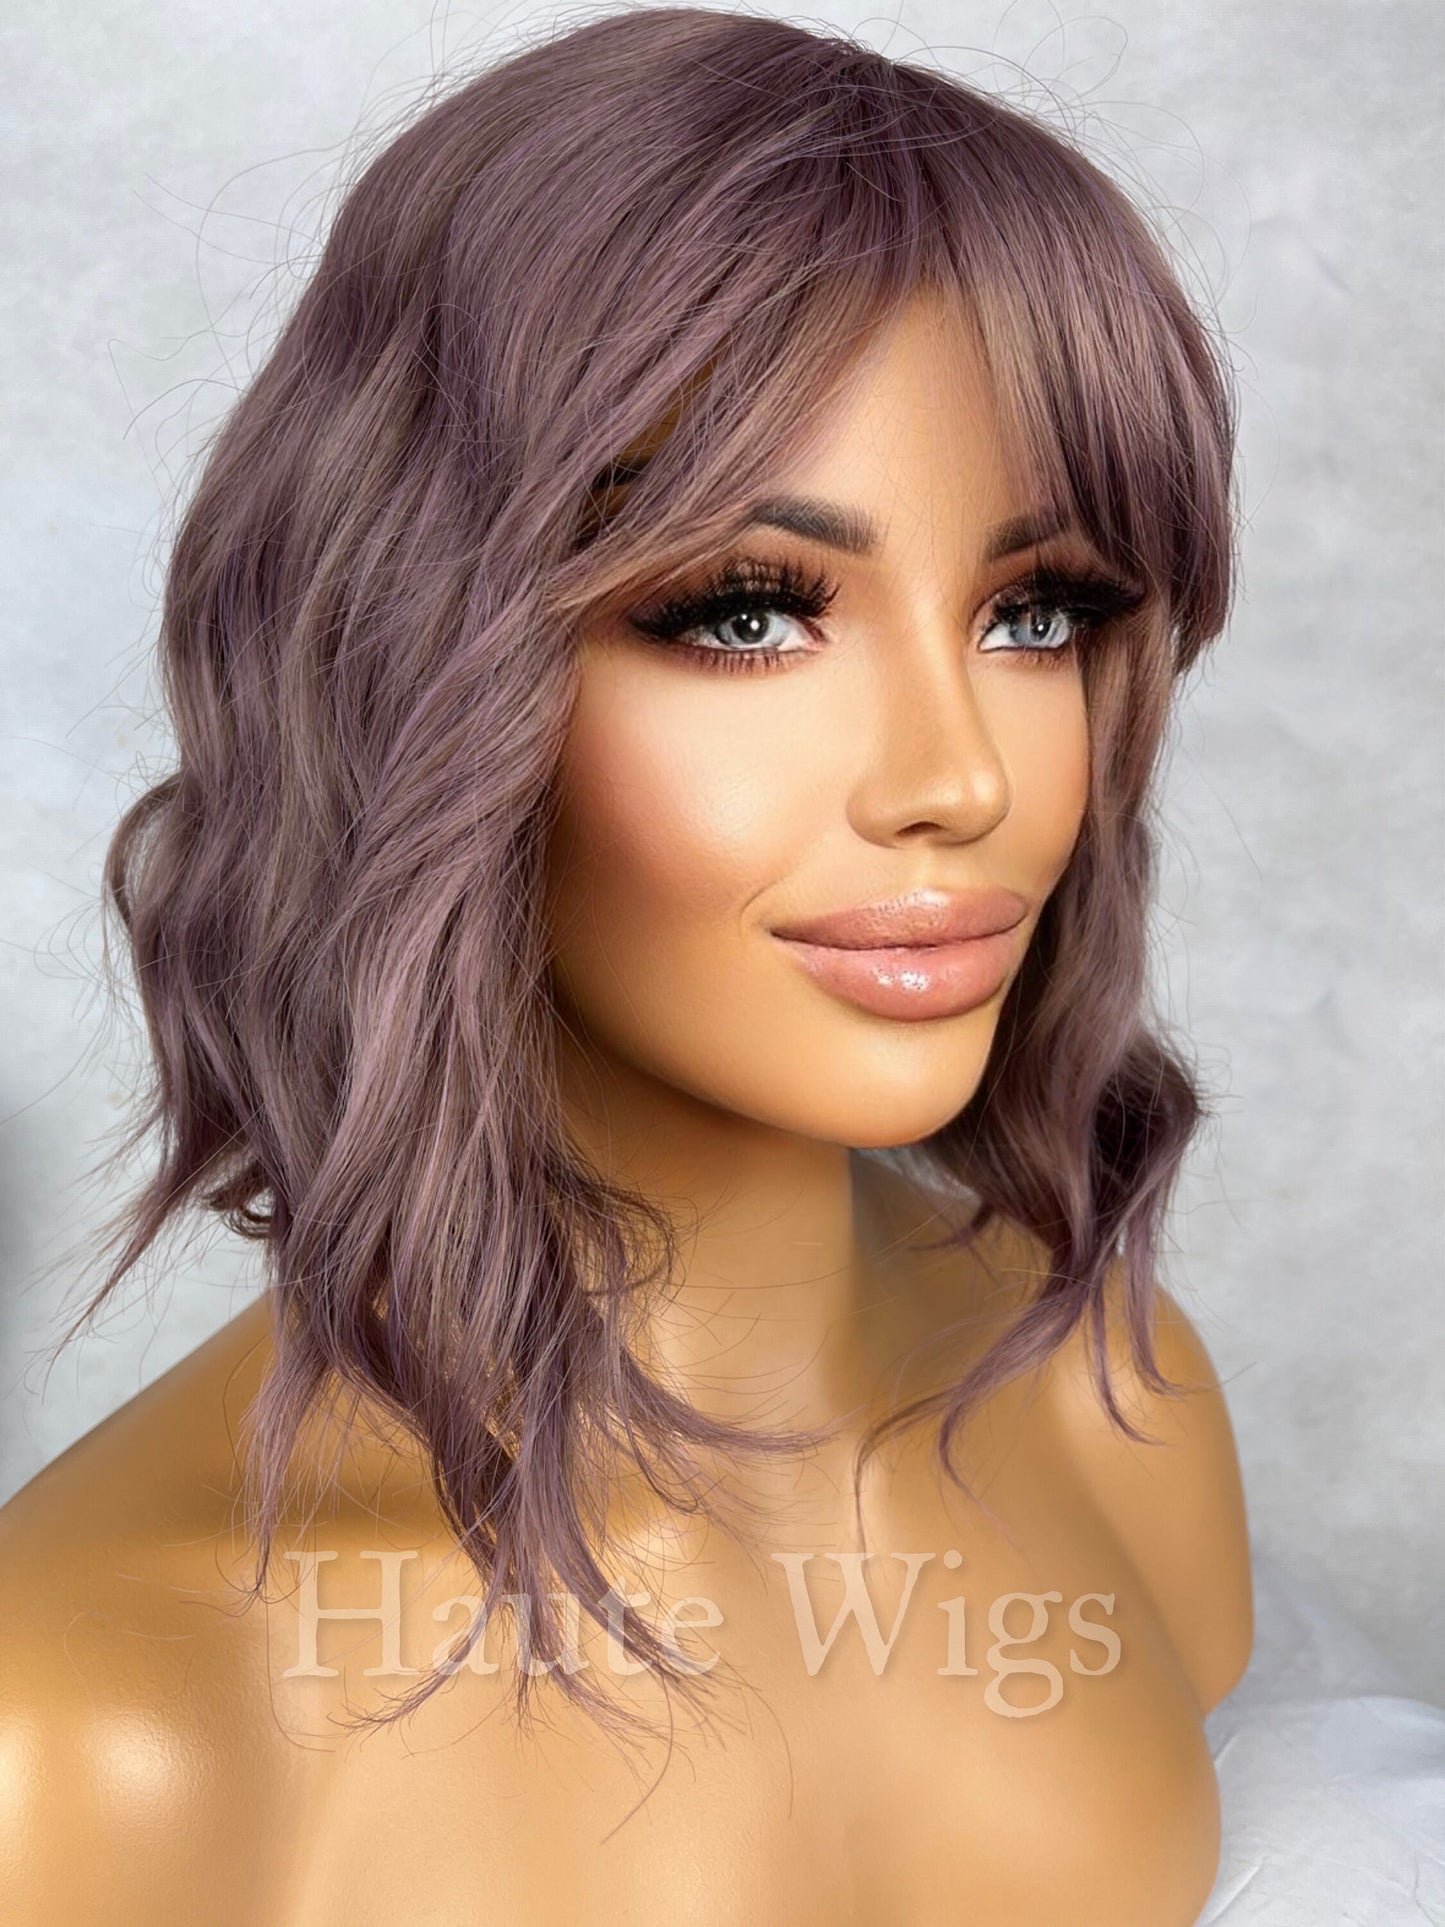 Rose Gold - Lilac Purple Violet Wig W Bangs Fringe Short Pixie BOB Wavy NO Lace Front Wigs Gift For Her Dark Roots Ladies Womens play